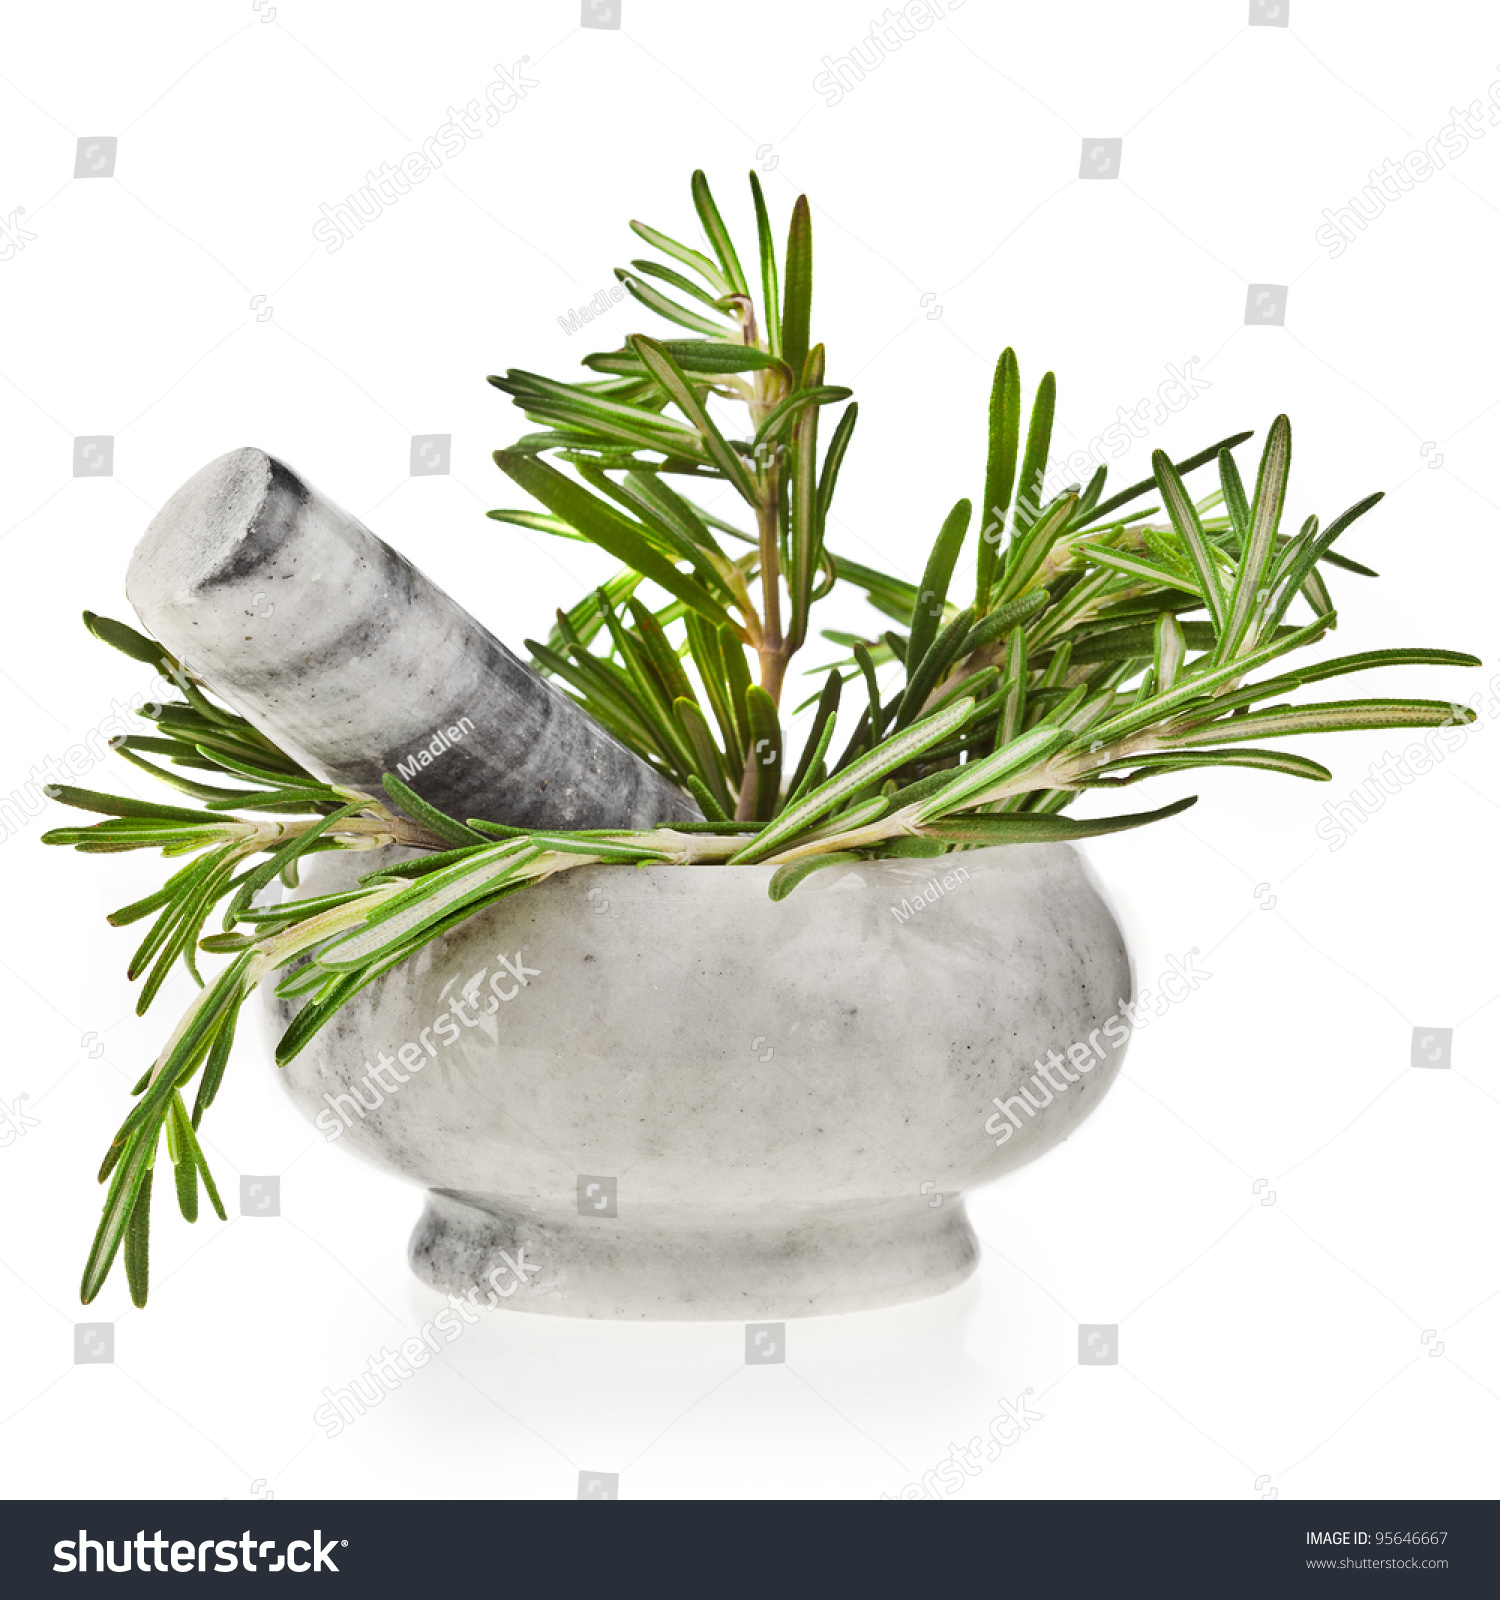 Marble Mortar Fresh Rosemary Herb Sprigs Stock Photo (Royalty Free ...